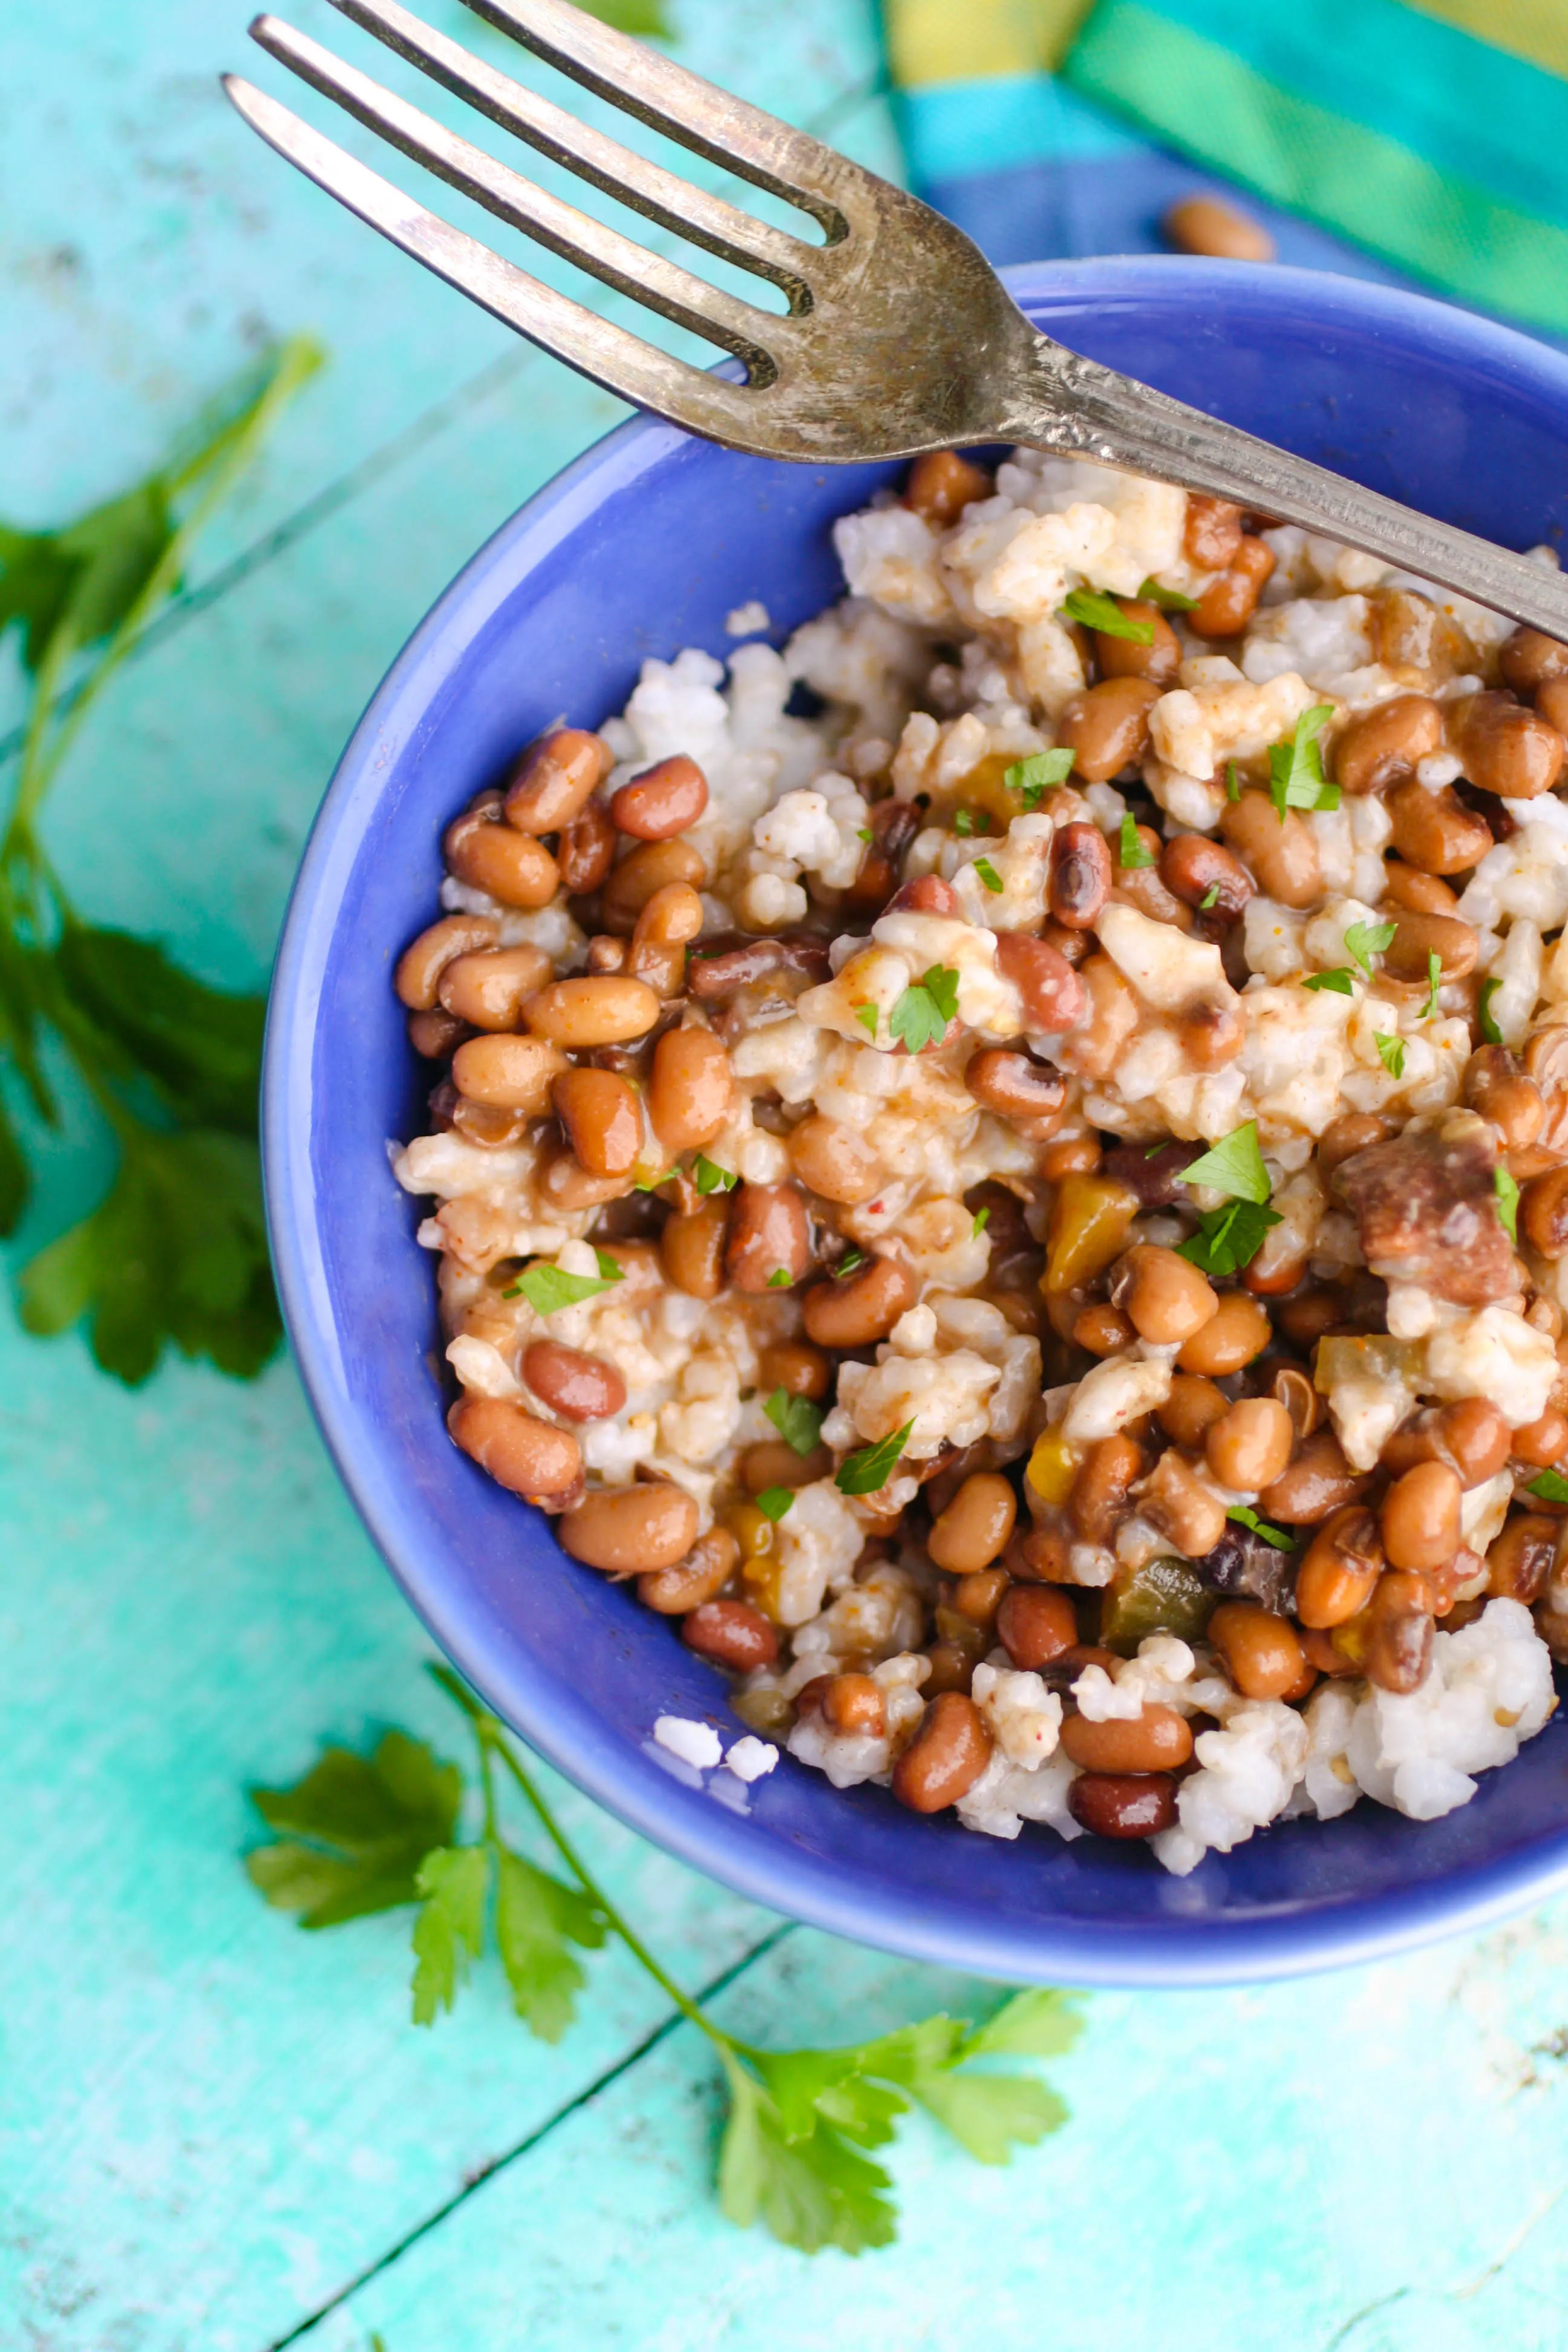 Sausage, Beans, and Rice is a lovely, simple dish that is hearty and satisfying. You'll love this Southern-inspired classic.